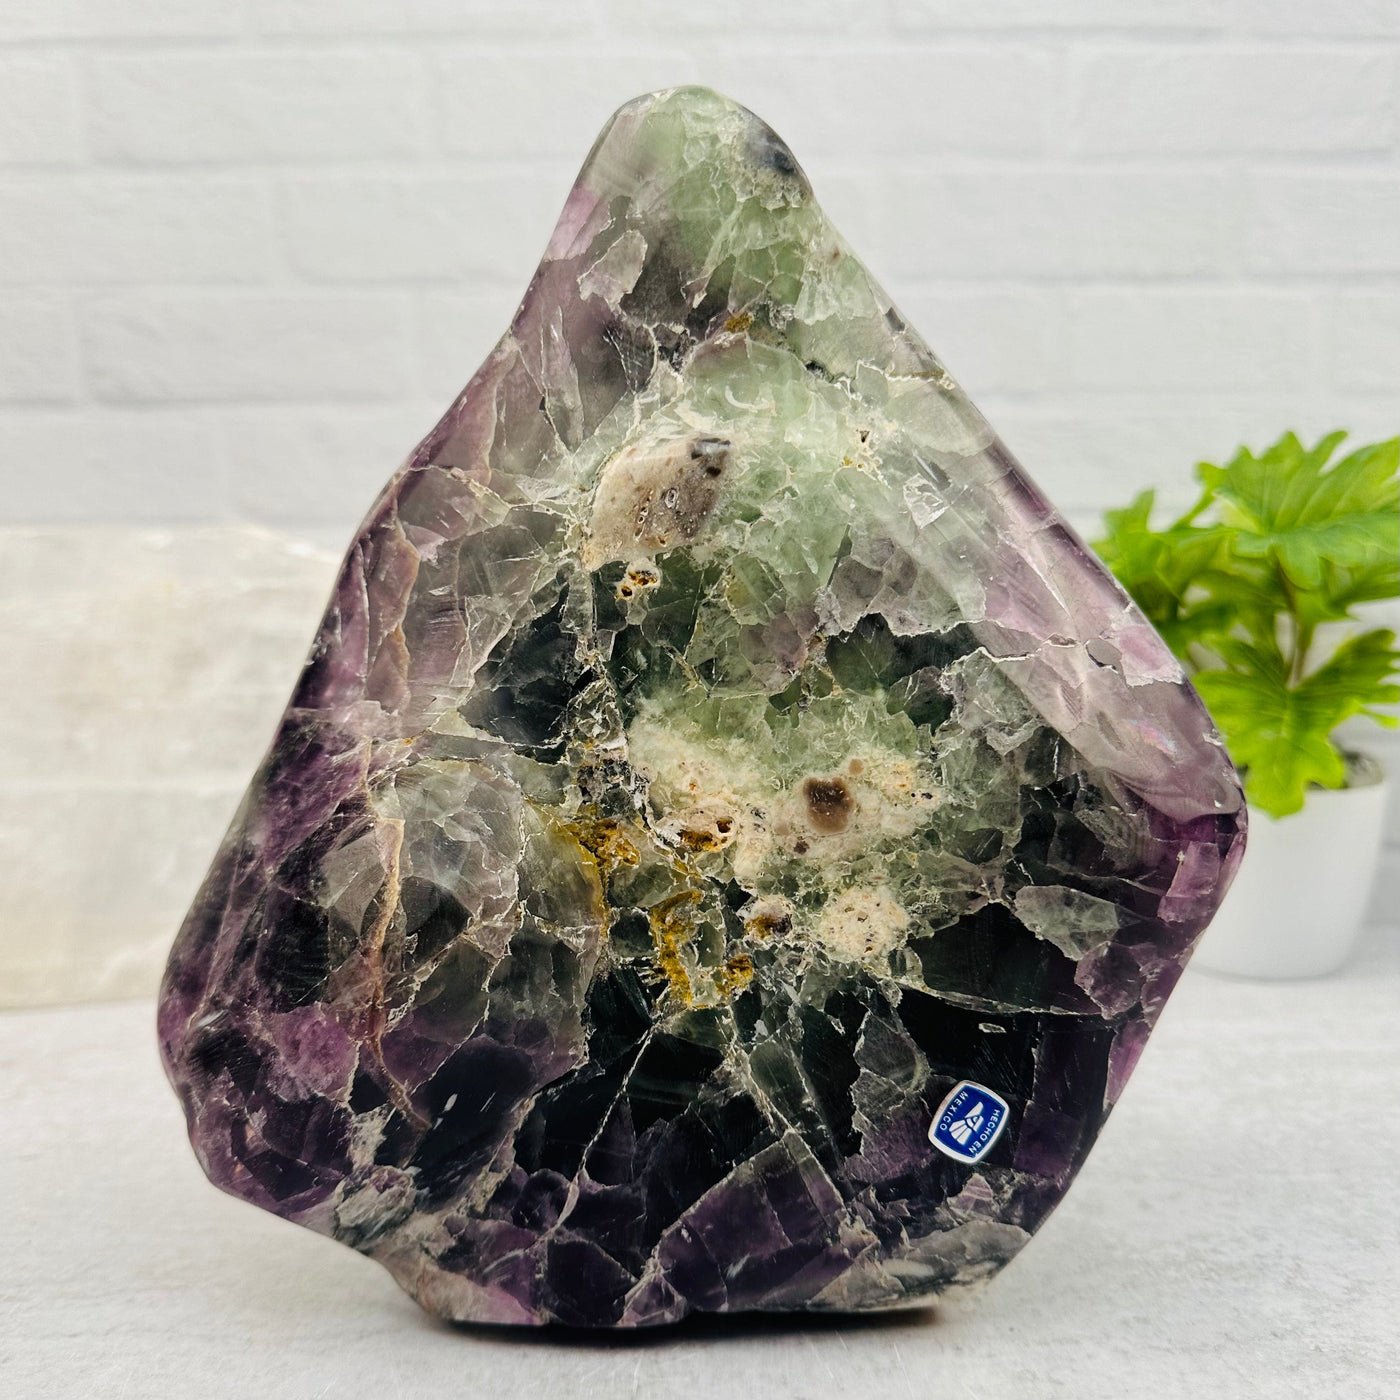 Large Tumbled Rainbow Fluorite Crystal displayed as home decor 